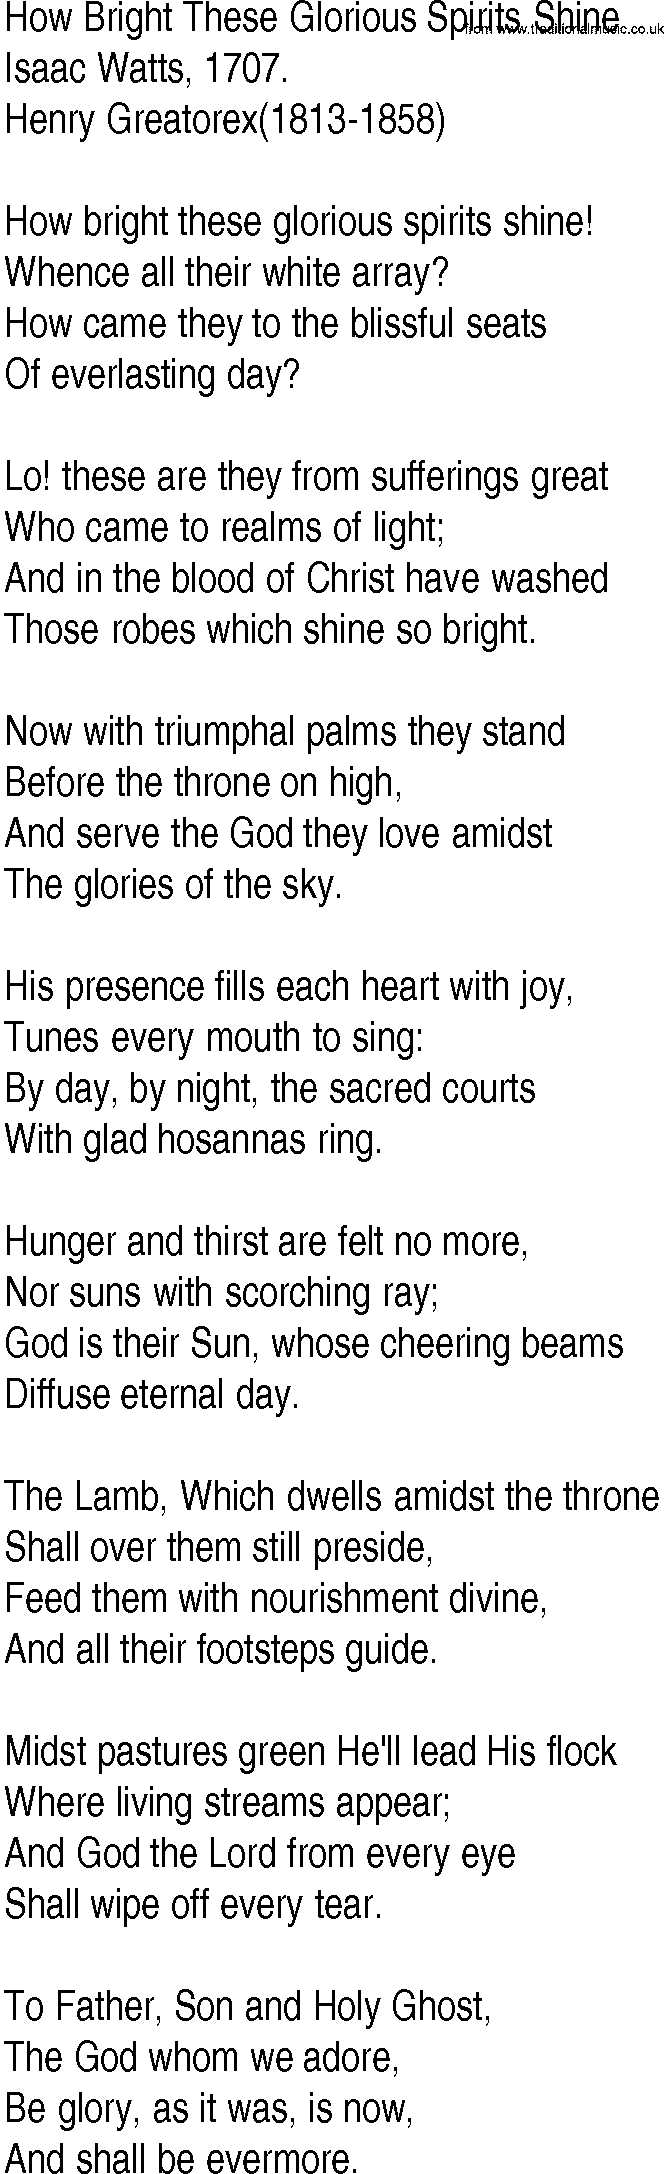 Hymn and Gospel Song: How Bright These Glorious Spirits Shine by Isaac Watts lyrics